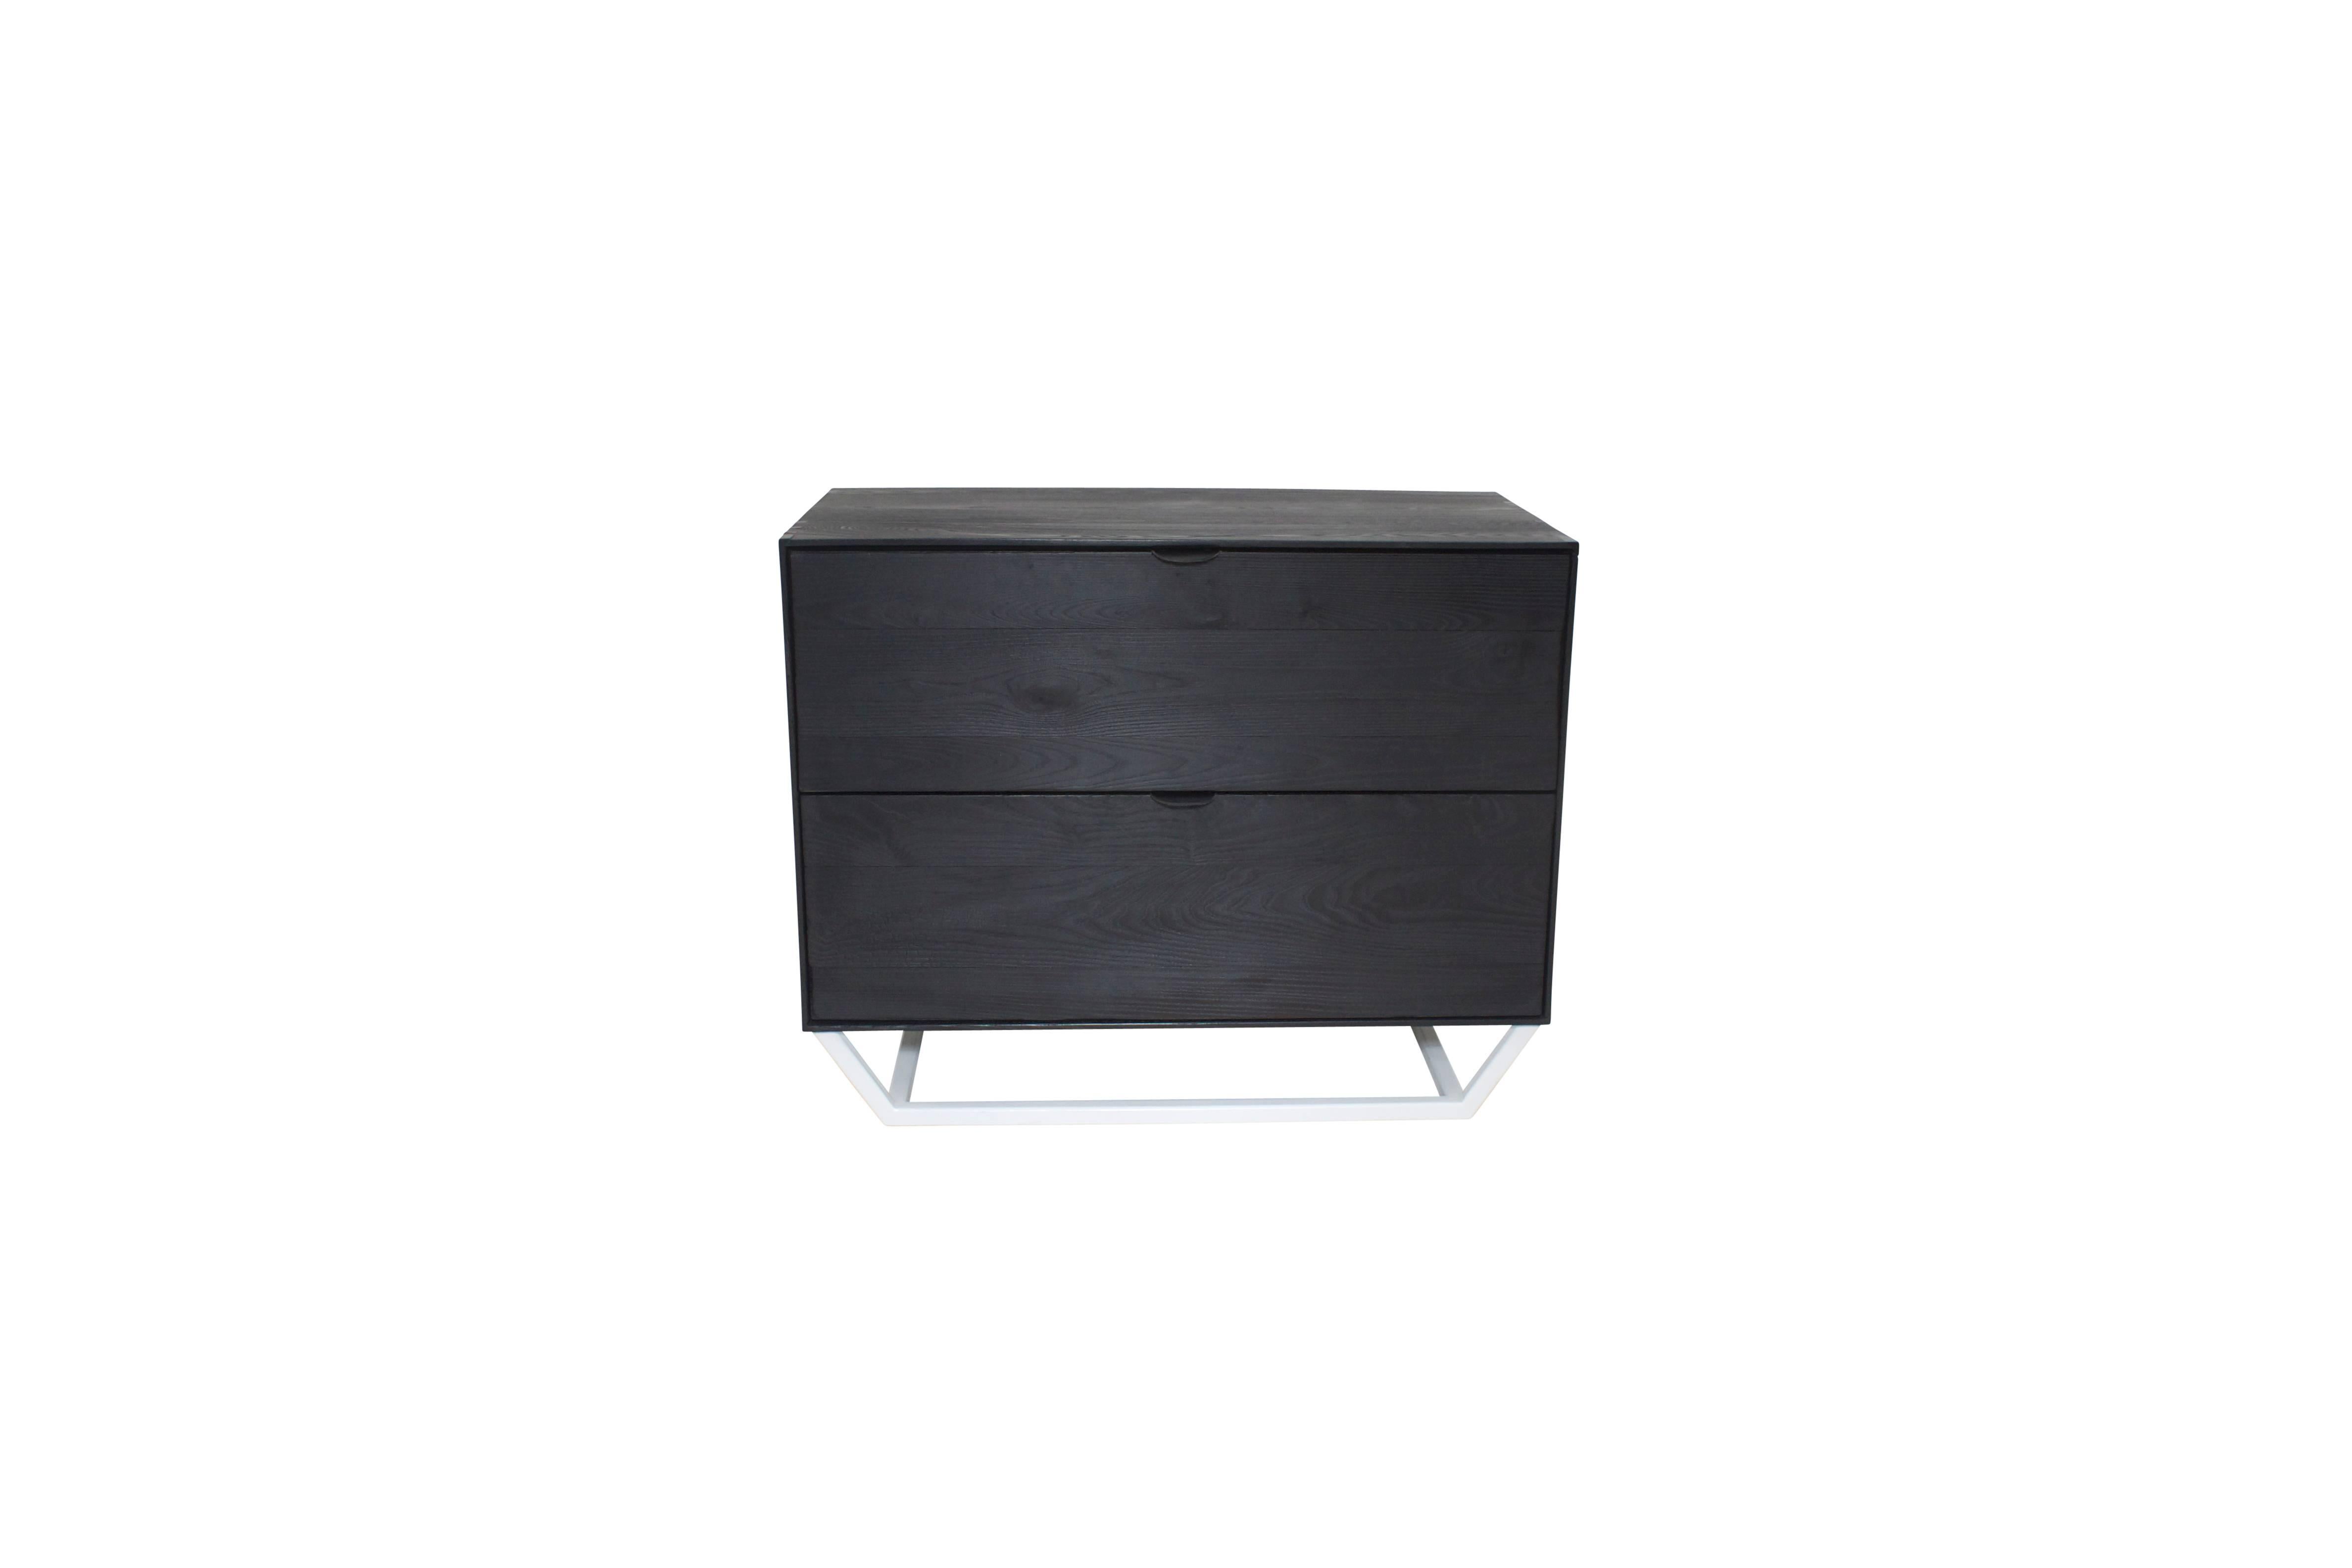 Minimalist Solid Ashwood Charred Credenza with Leather Pulls, Hidden Drawer and Steel Base